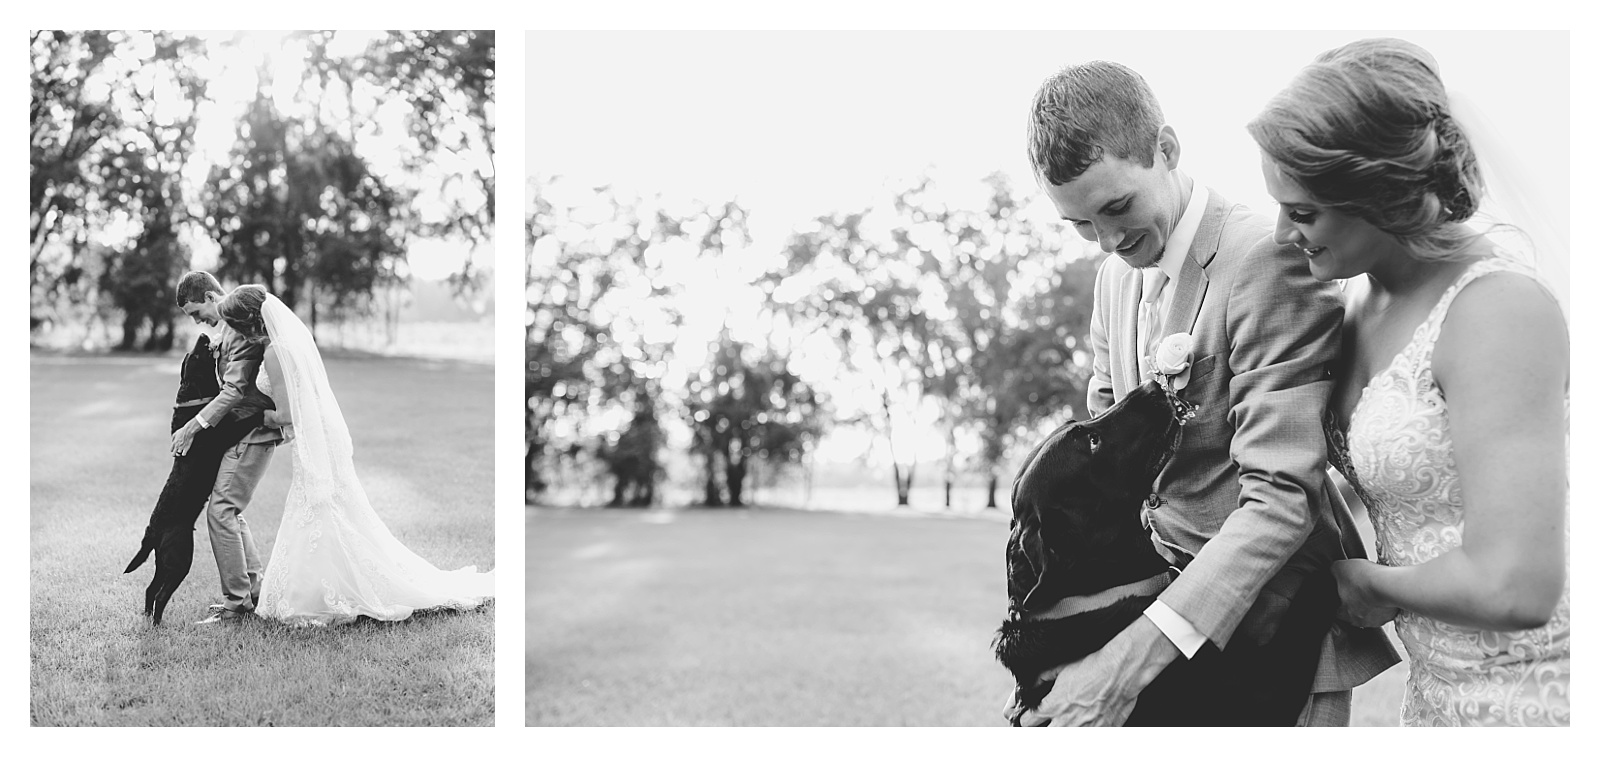 Sweet photos of dog with wedding couple in North Florida. Shelly Williams Photography